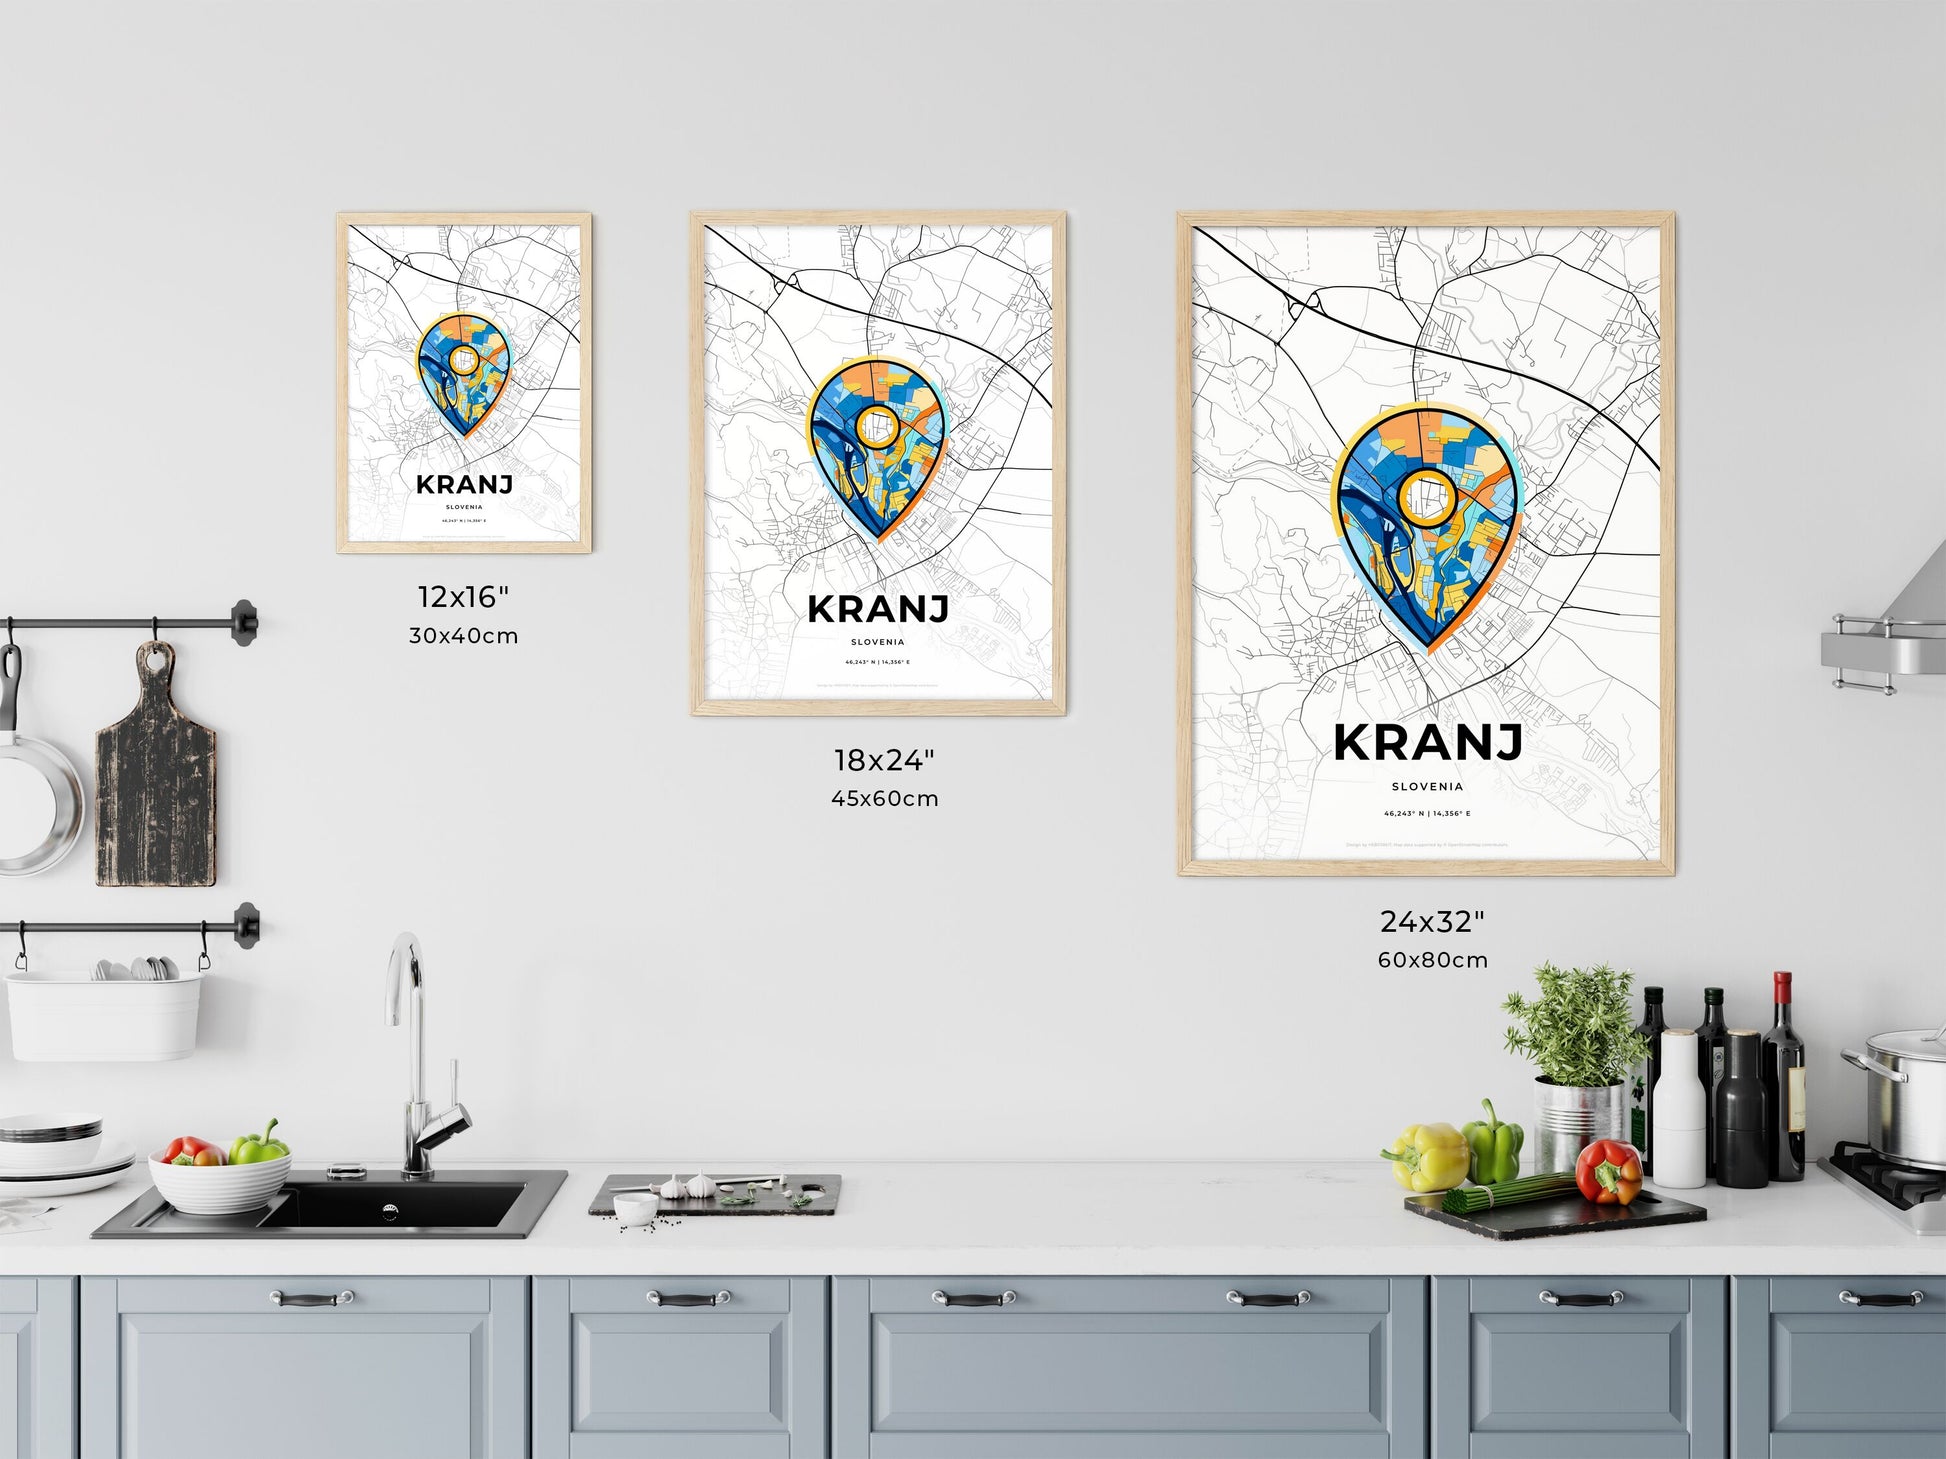 KRANJ SLOVENIA minimal art map with a colorful icon. Where it all began, Couple map gift.